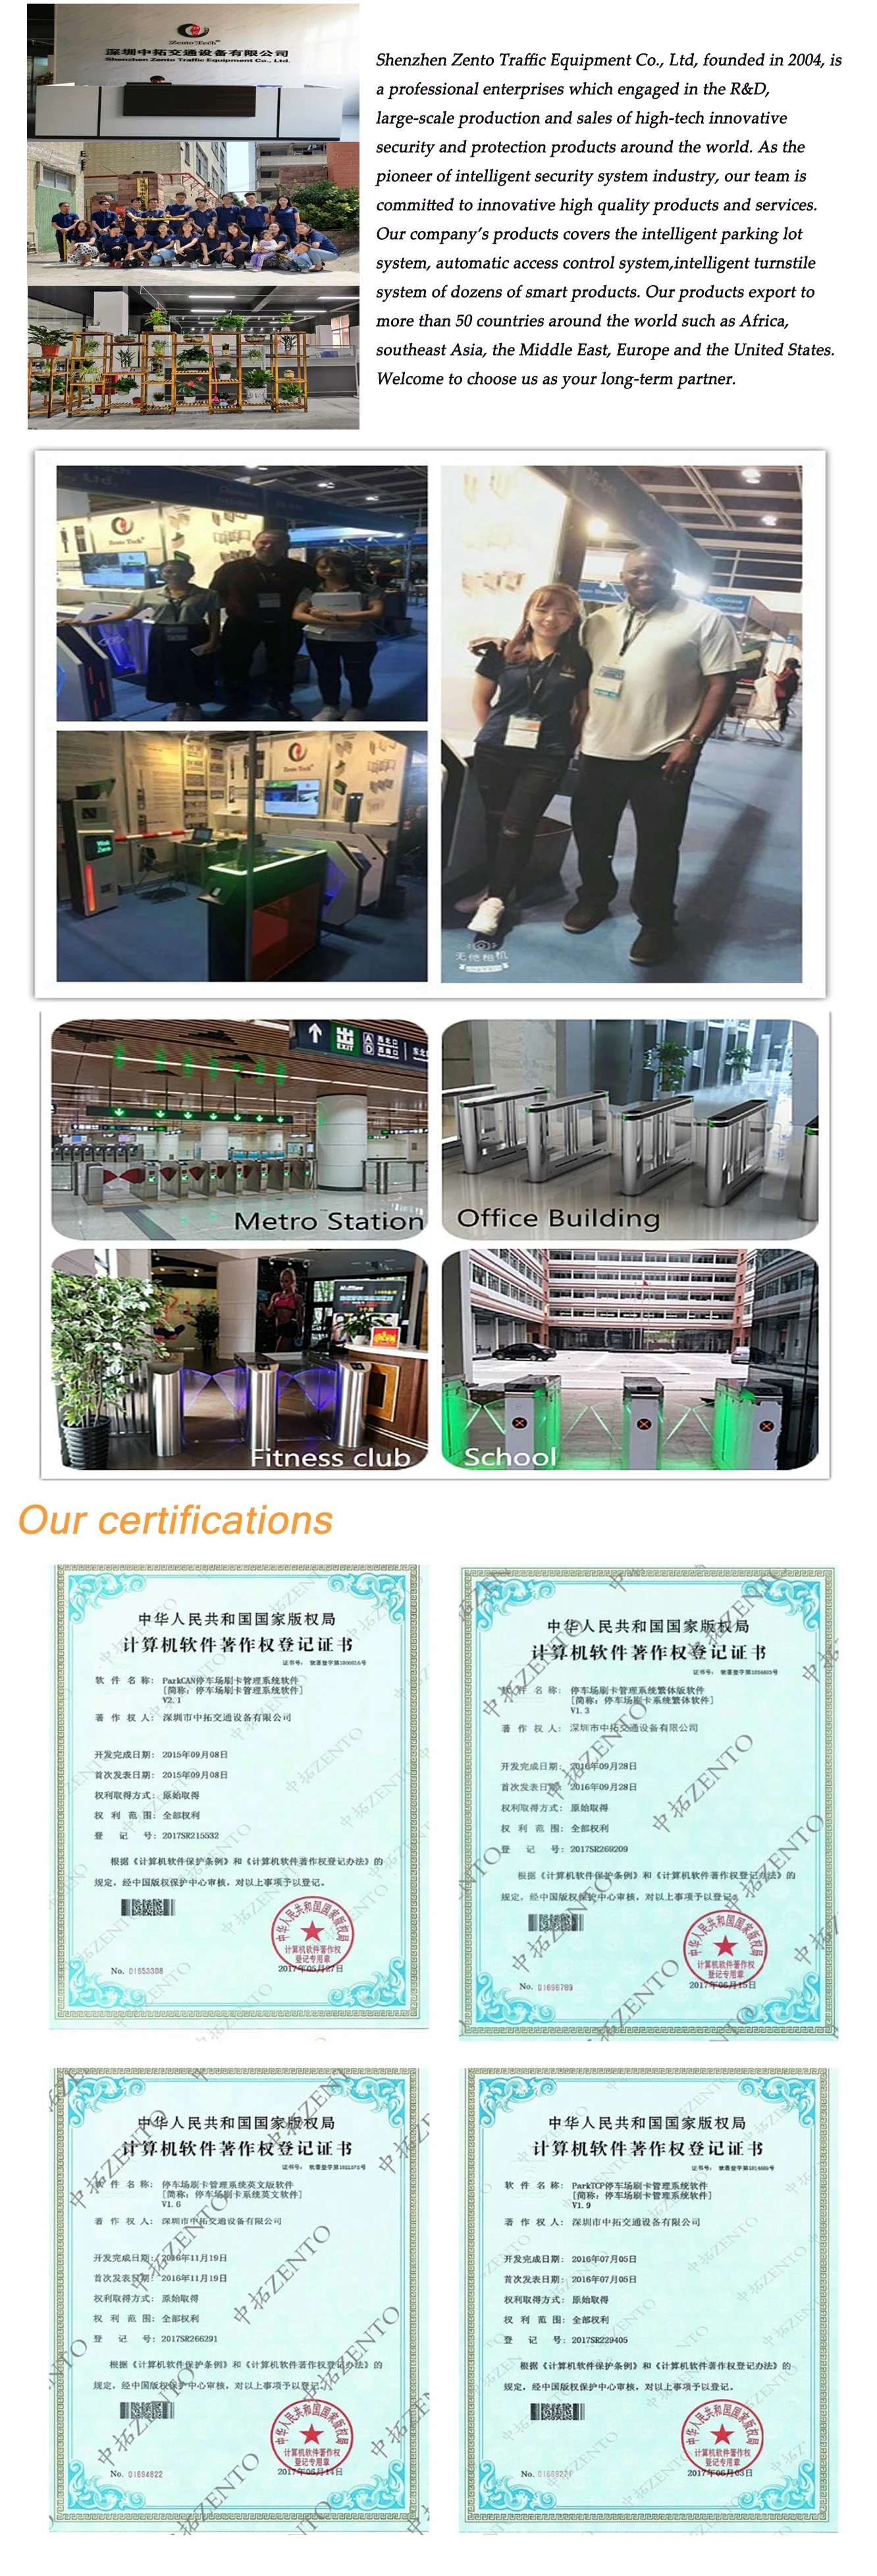 ZENTO Access Control System  Pedestrian Safety Full height sliding Turnstile Security  Barriers